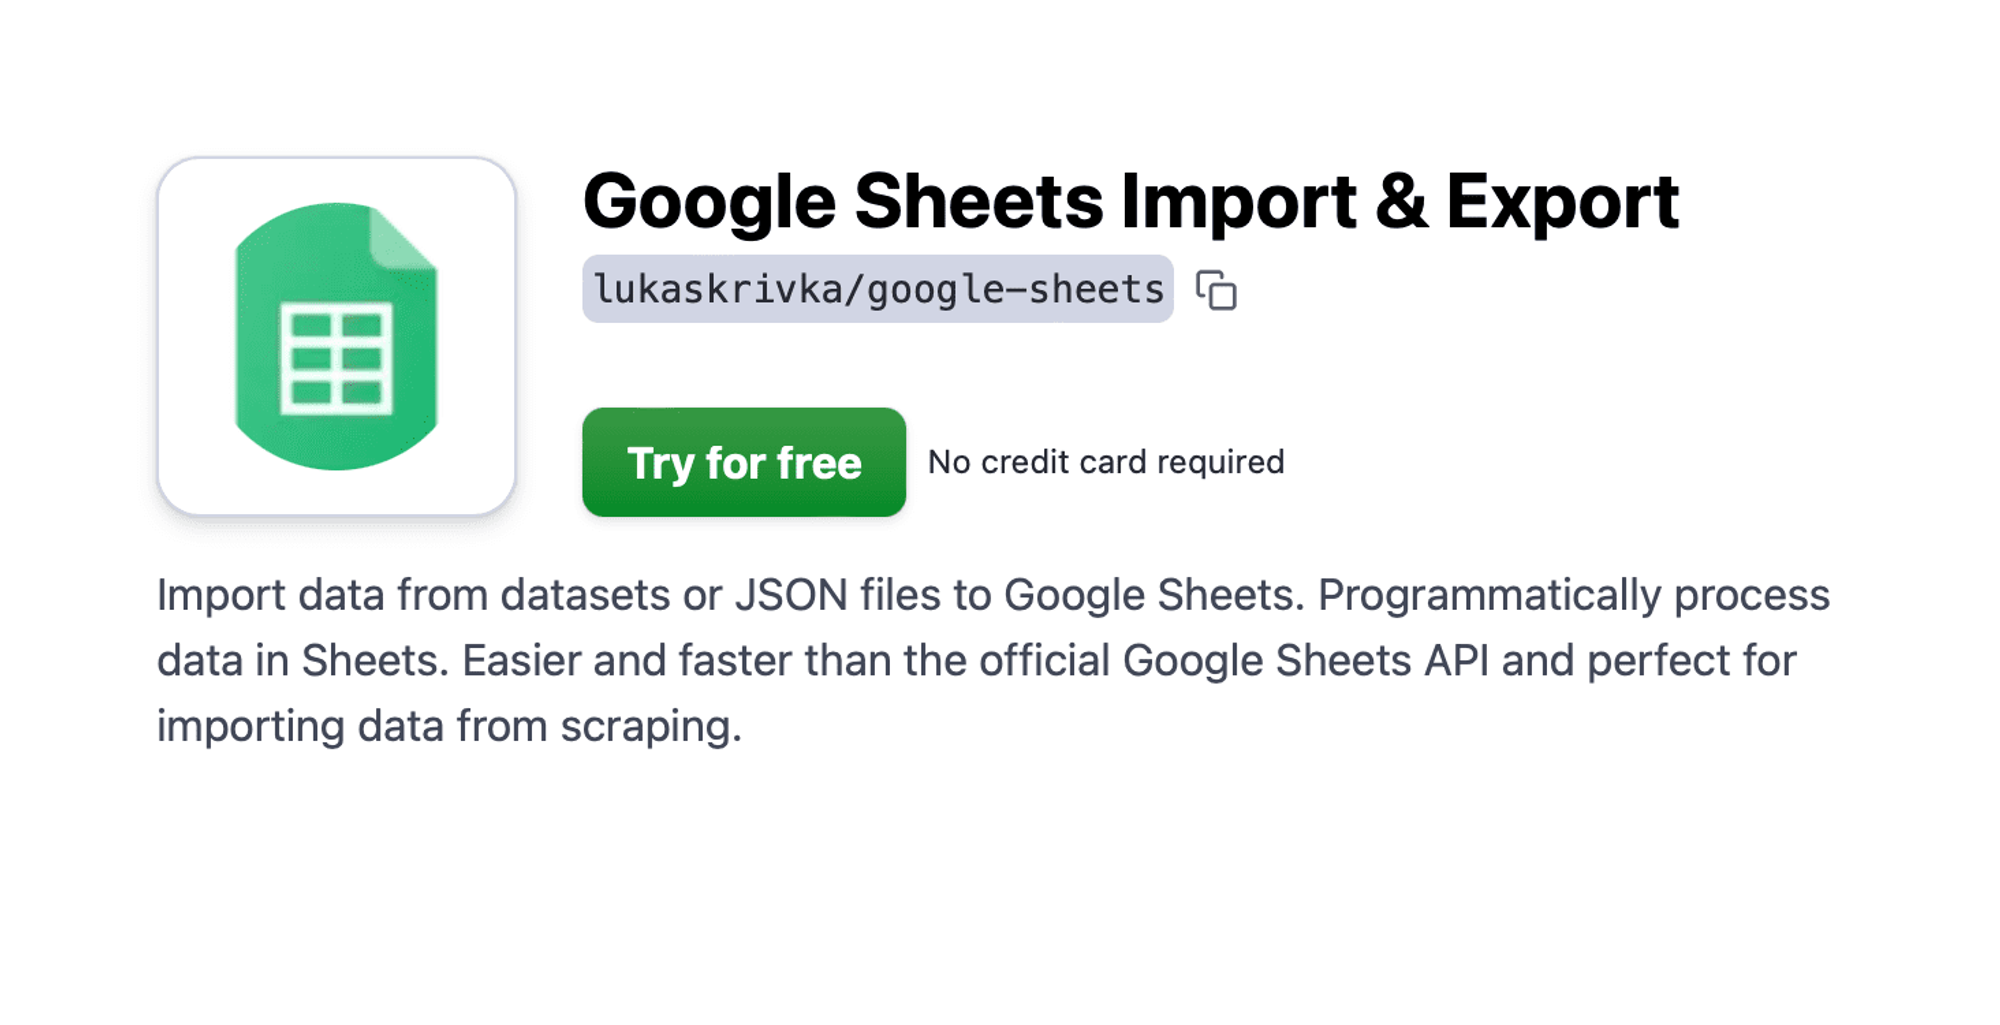 Google Sheets Import & Export scraper can extract data and parse it for you in seconds.